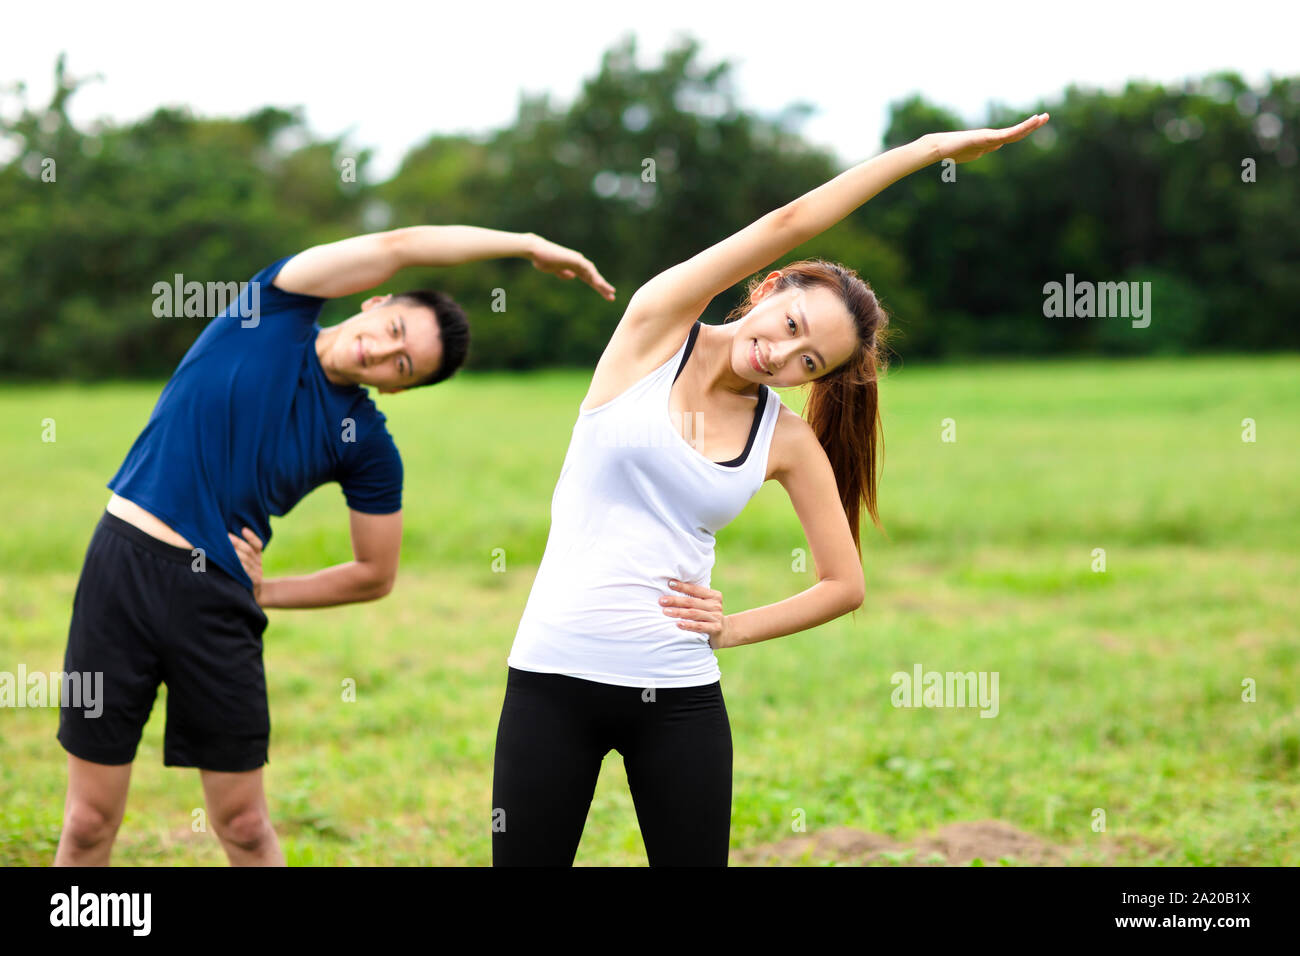 Young couple working out together outdoors Banque D'Images